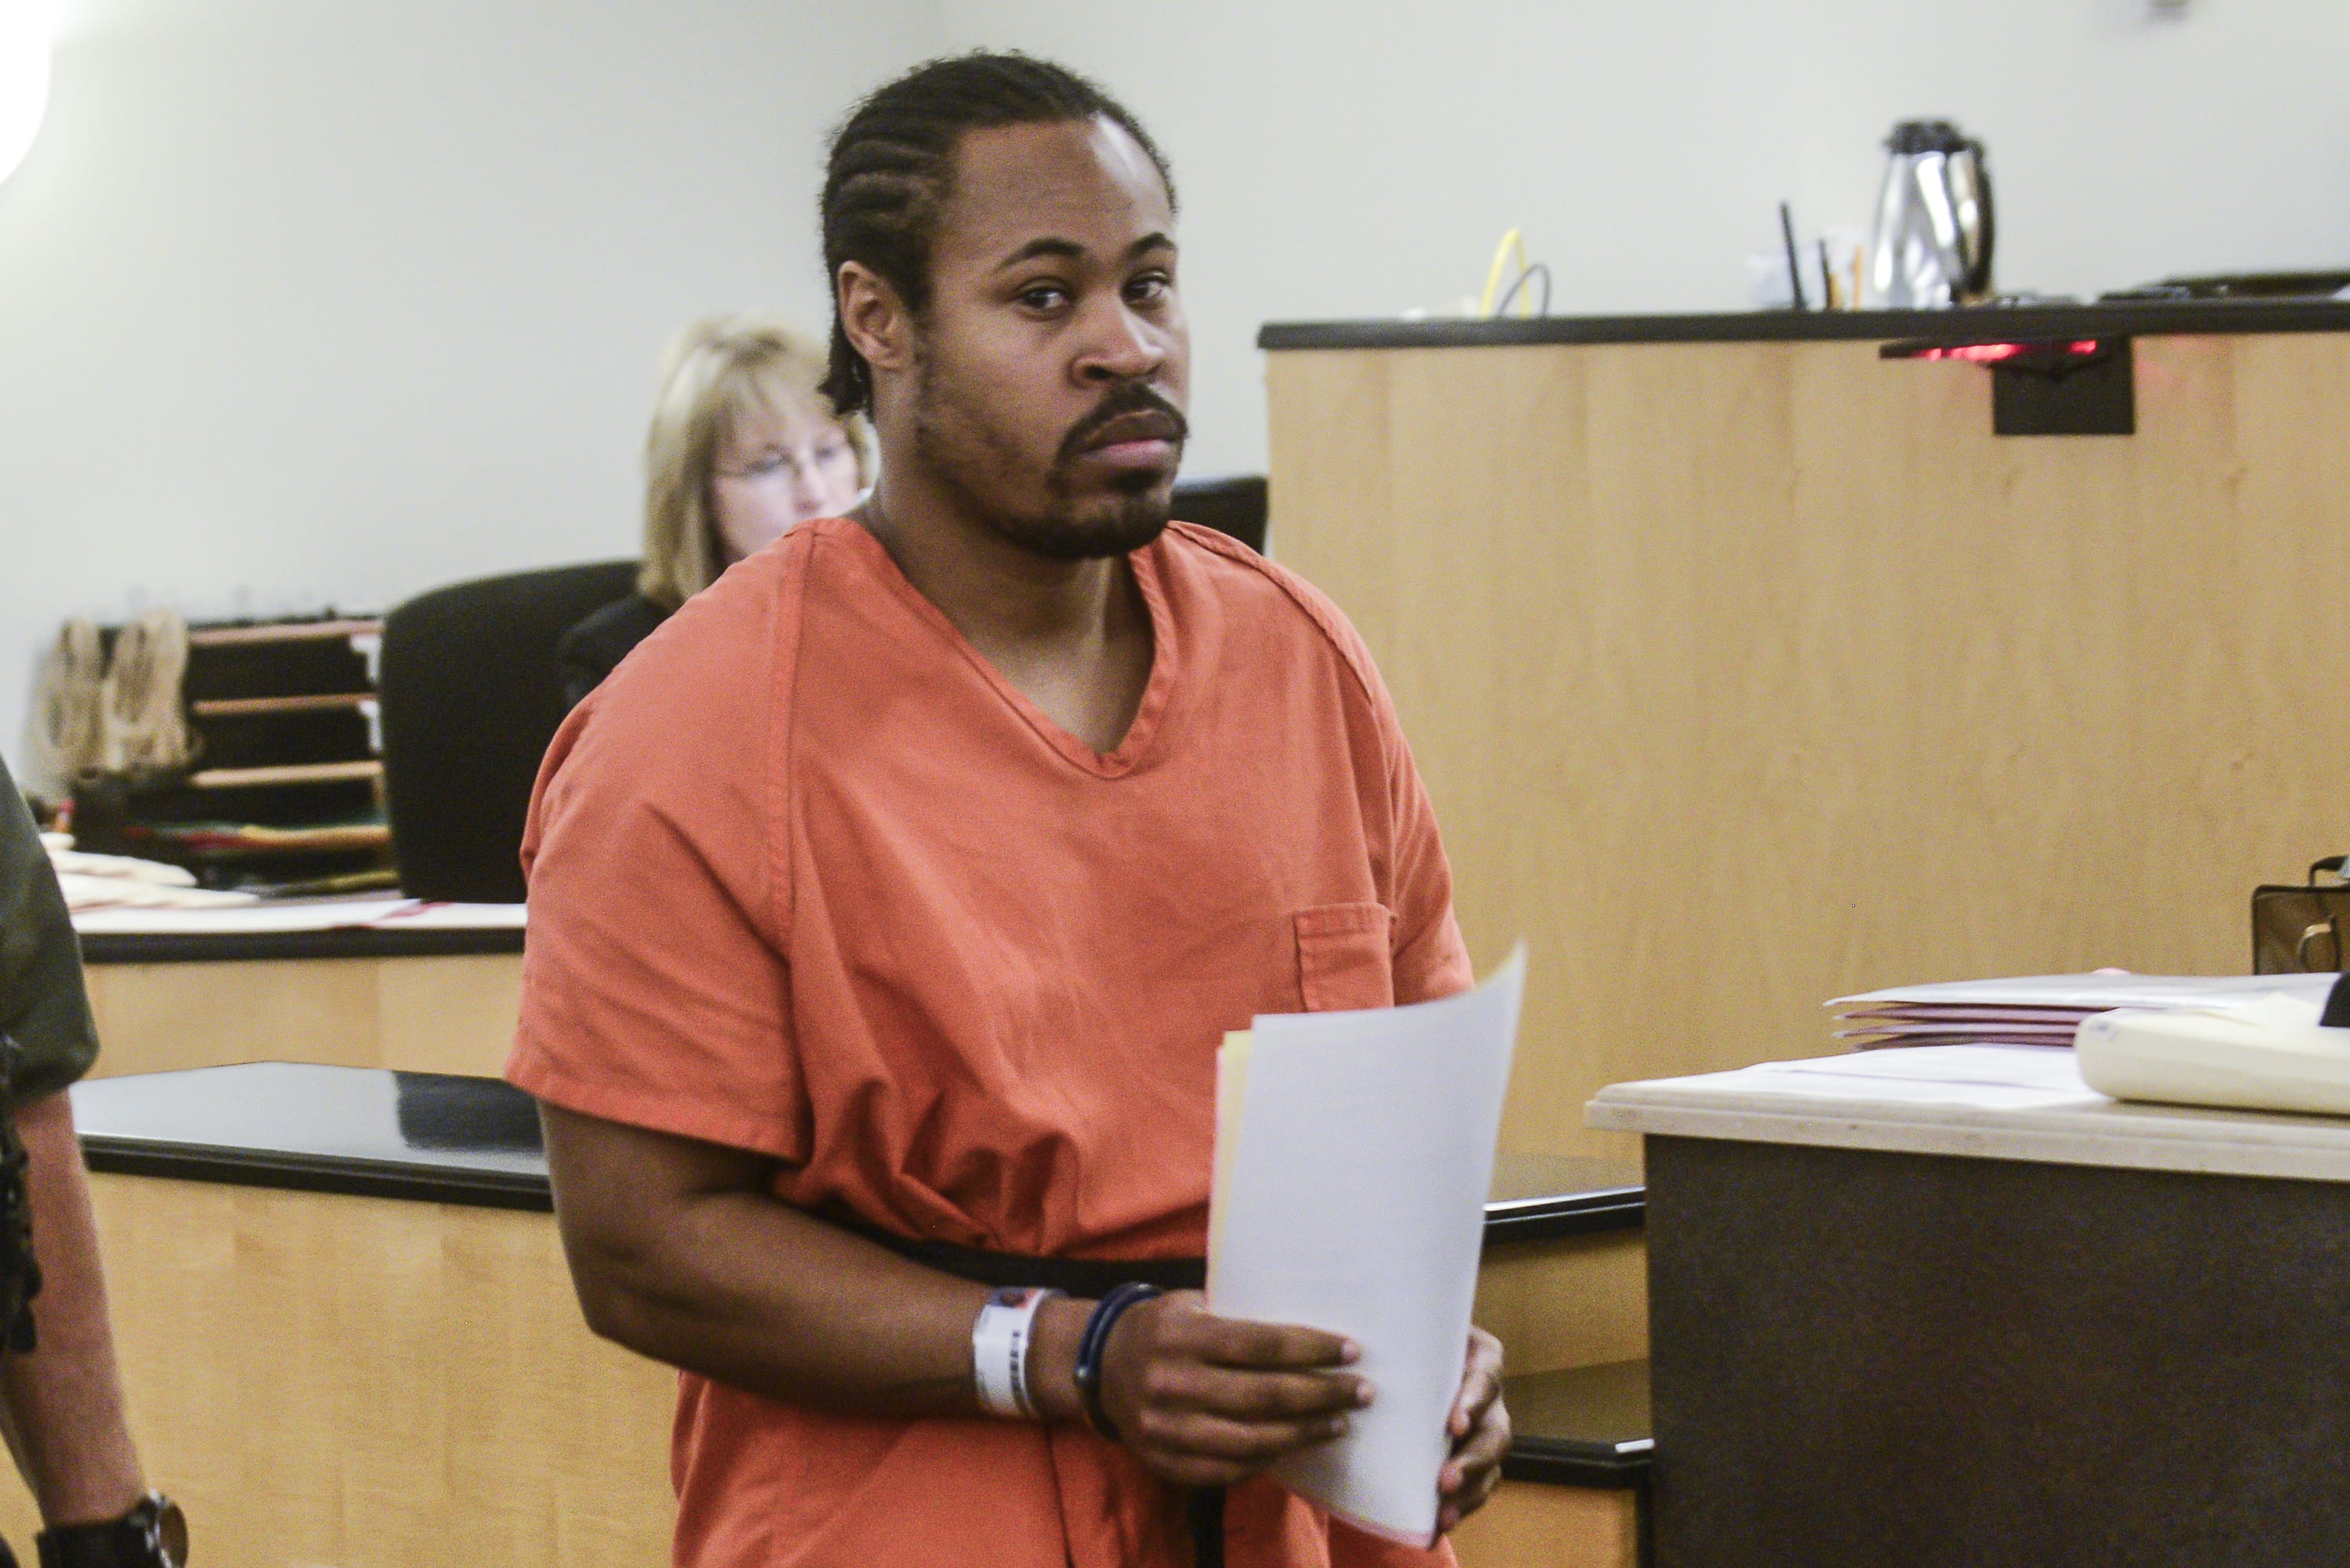 Michael Diontae Johnson, the man who authorities say swapped identities with a fellow inmate to escape from the Clark County Jail in May, appeared Monday in Clark County Superior Court on suspicion of second-degree escape.